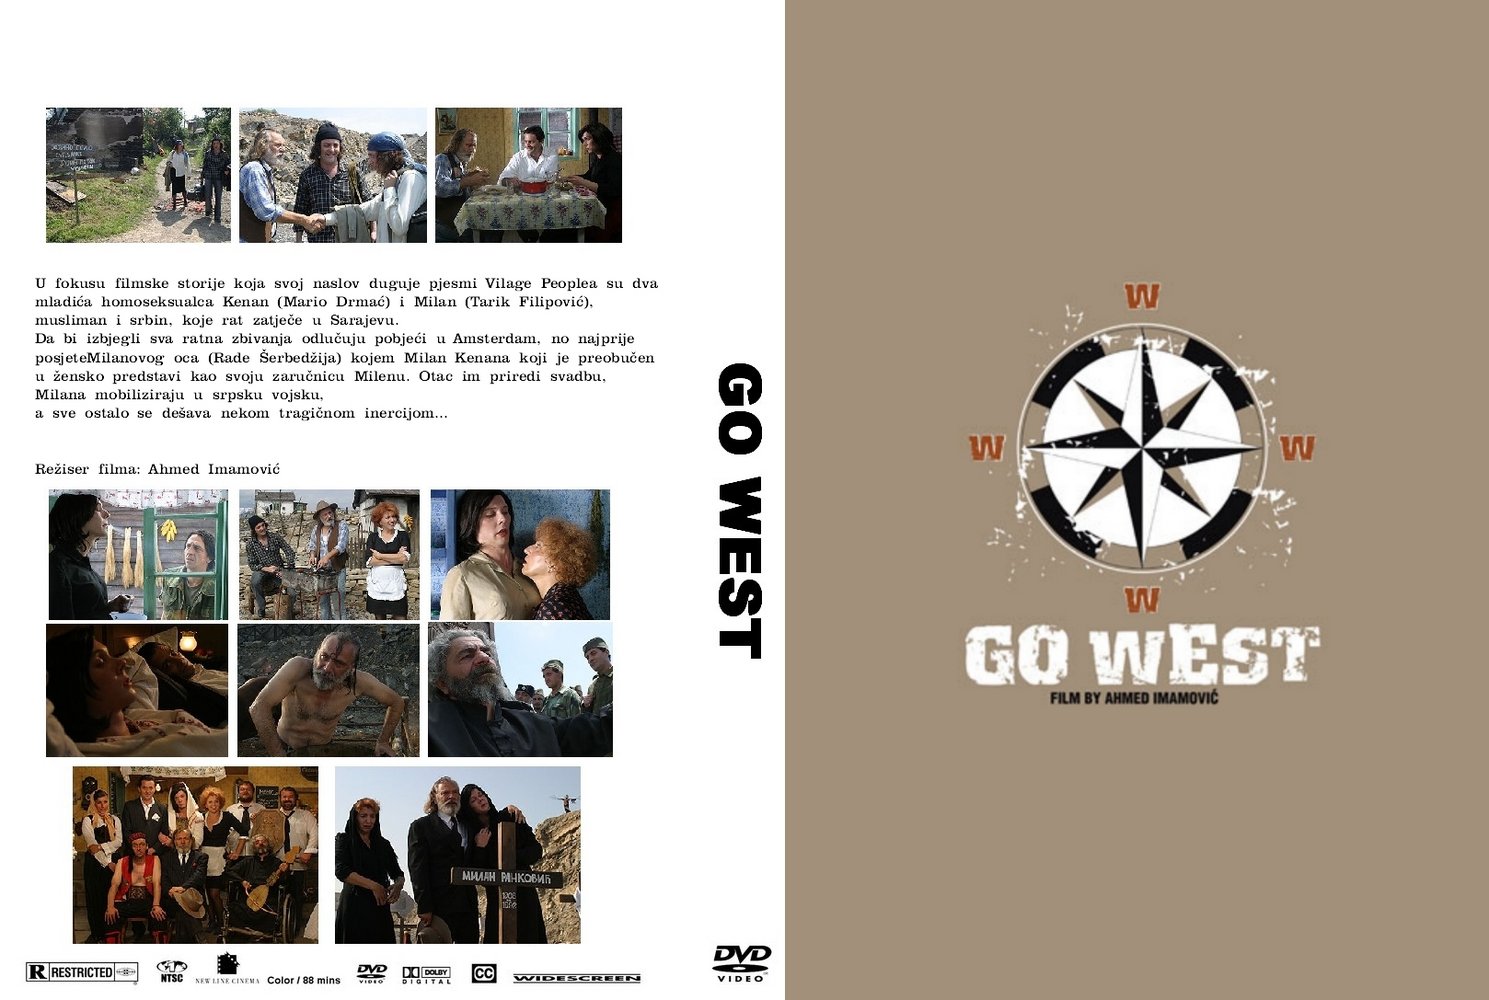 Click to view full size image -  DVD Cover - G - DVD - GO WEST1 - DVD - GO WEST1.jpg